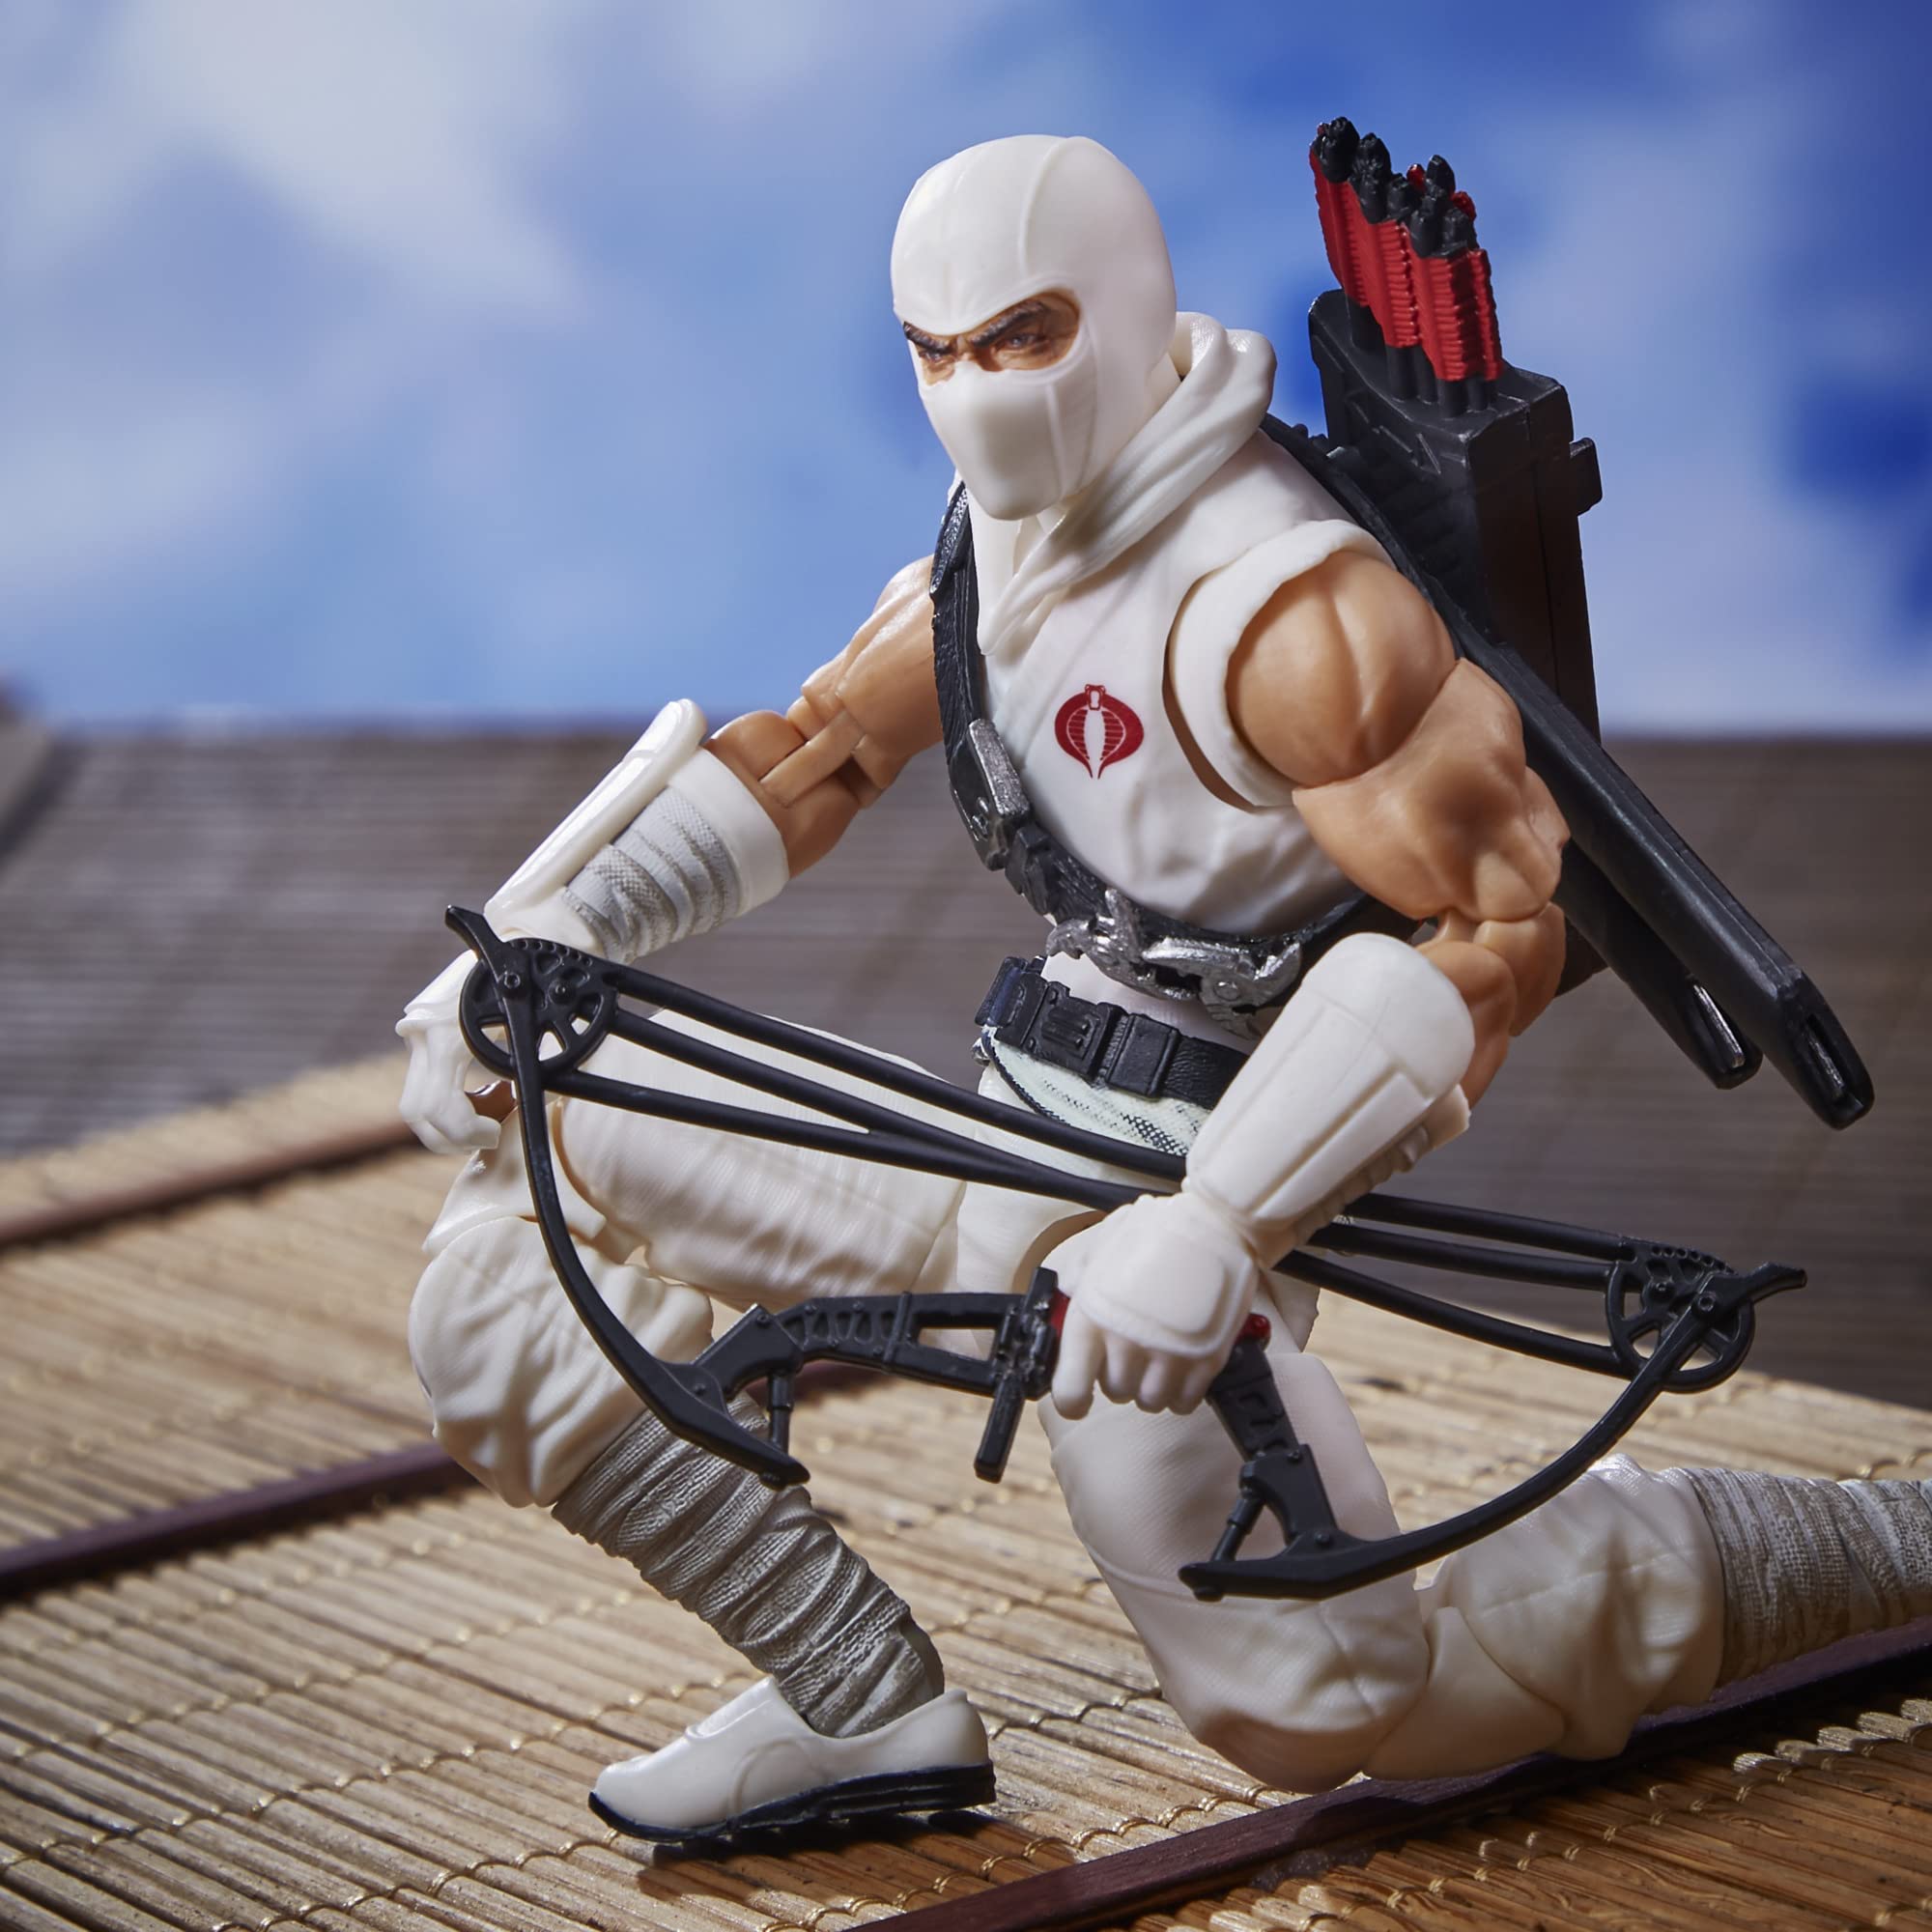 G.I. Joe Classified Series Storm Shadow Action Figure 35 Collectible Premium Toy, Multiple Accessories 6-Inch-Scale with Custom Package Art